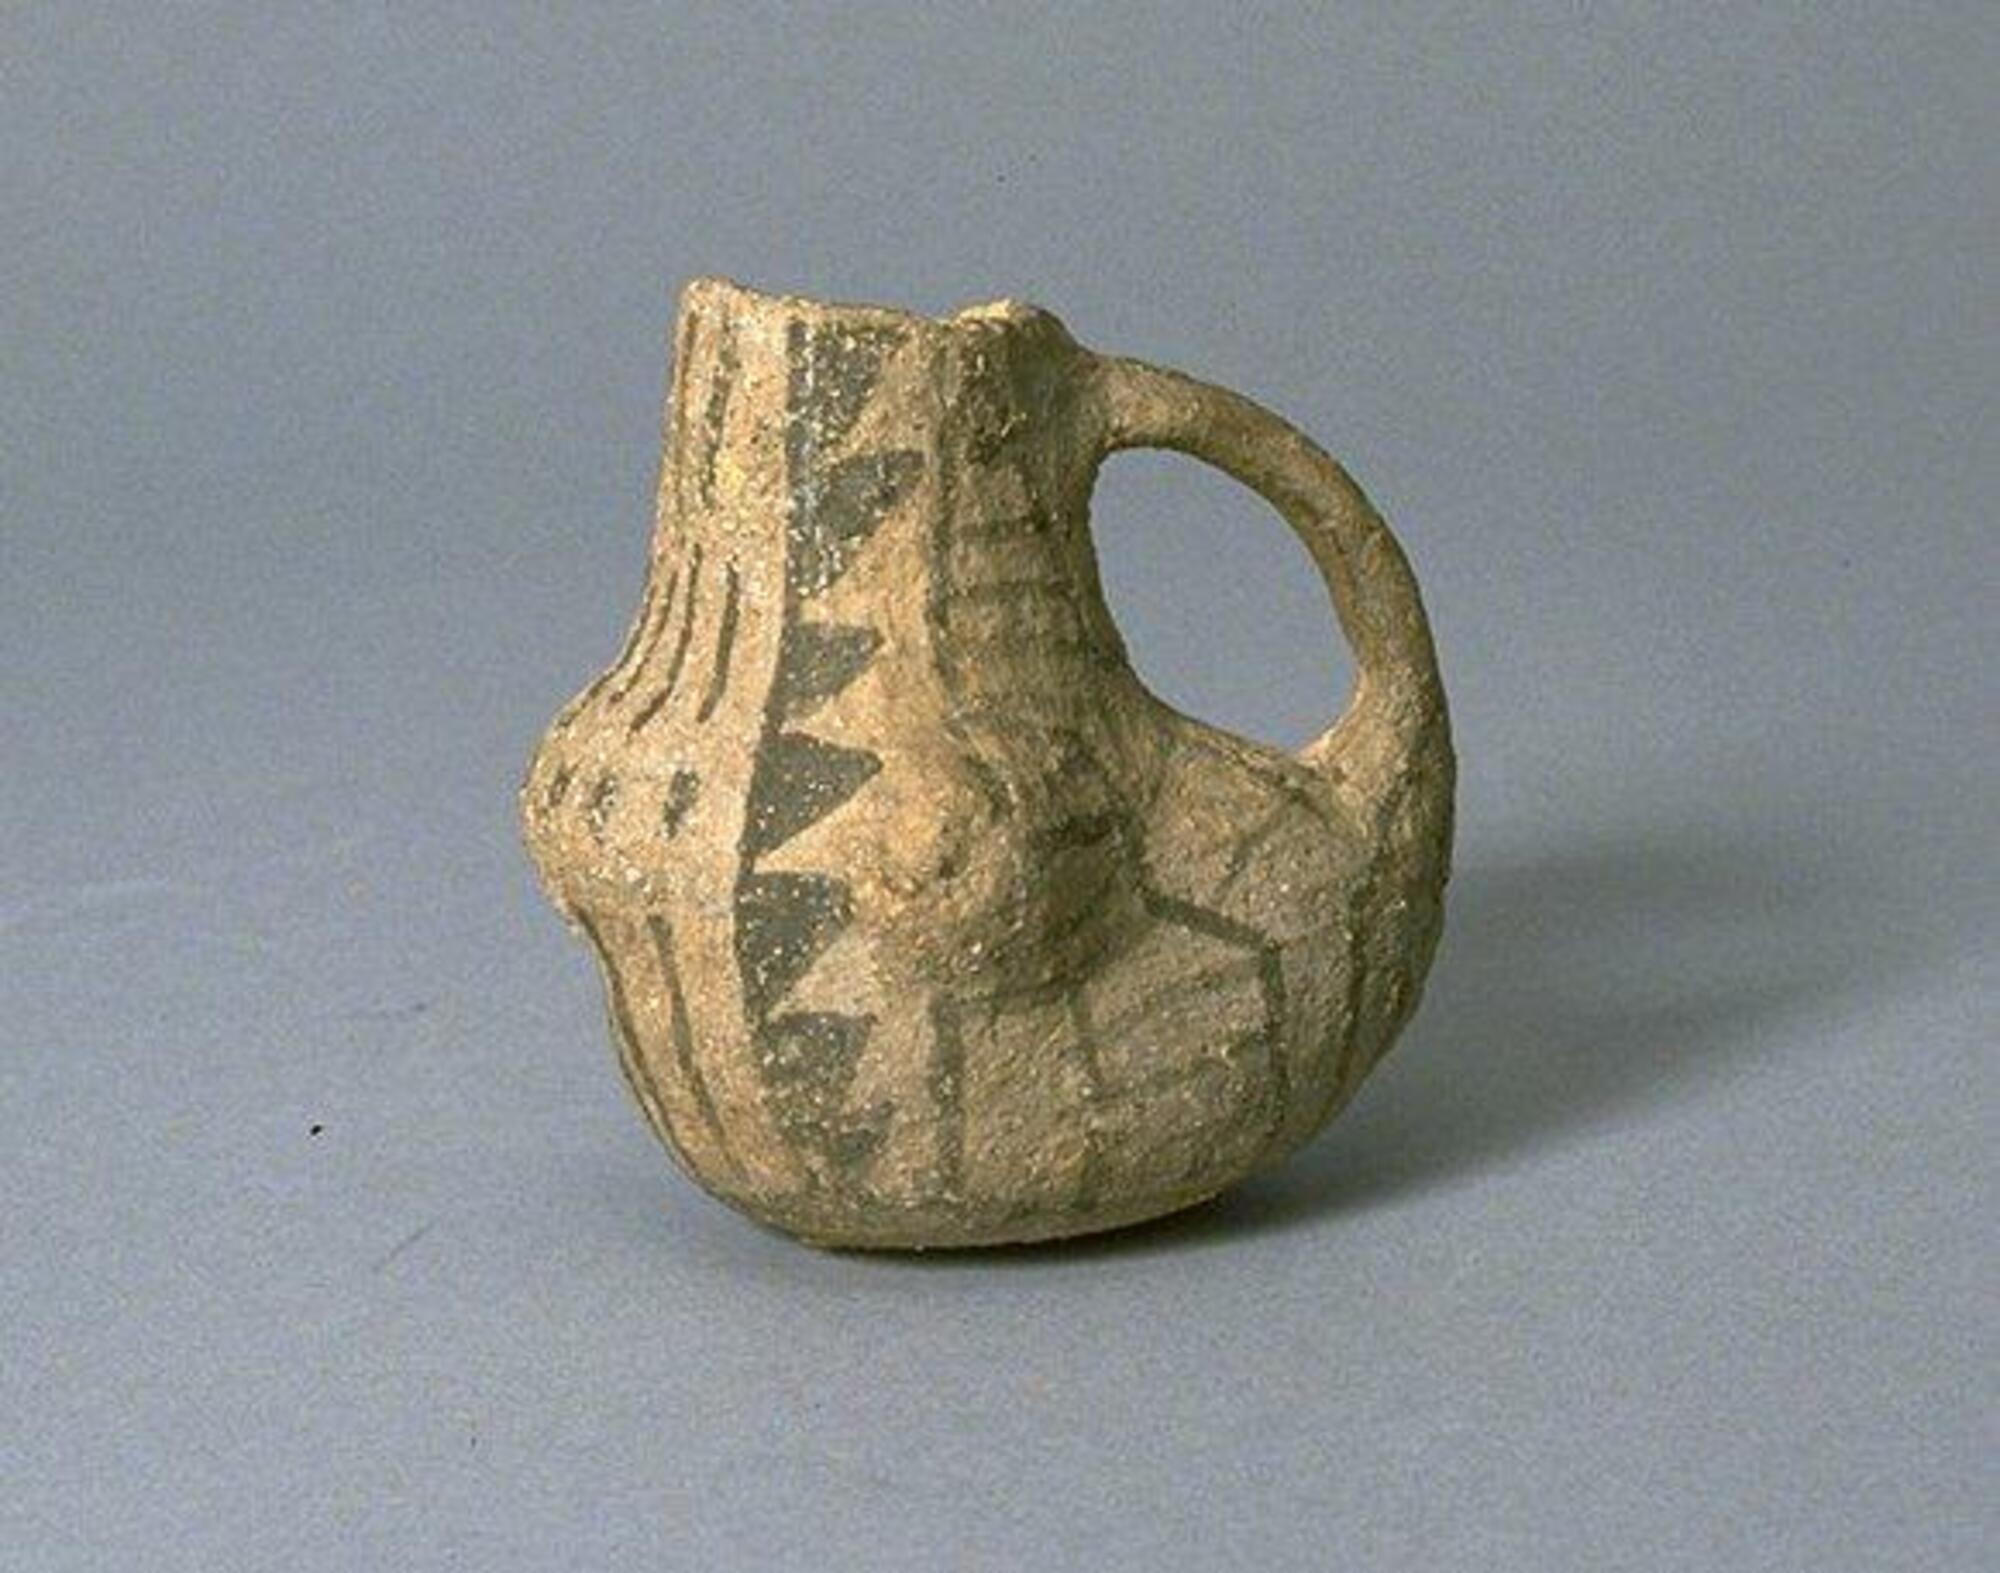 This mug-sized vessel has a bulbous body, a narrower tall neck, and handle. It is beige with black painted geometric and striped design.